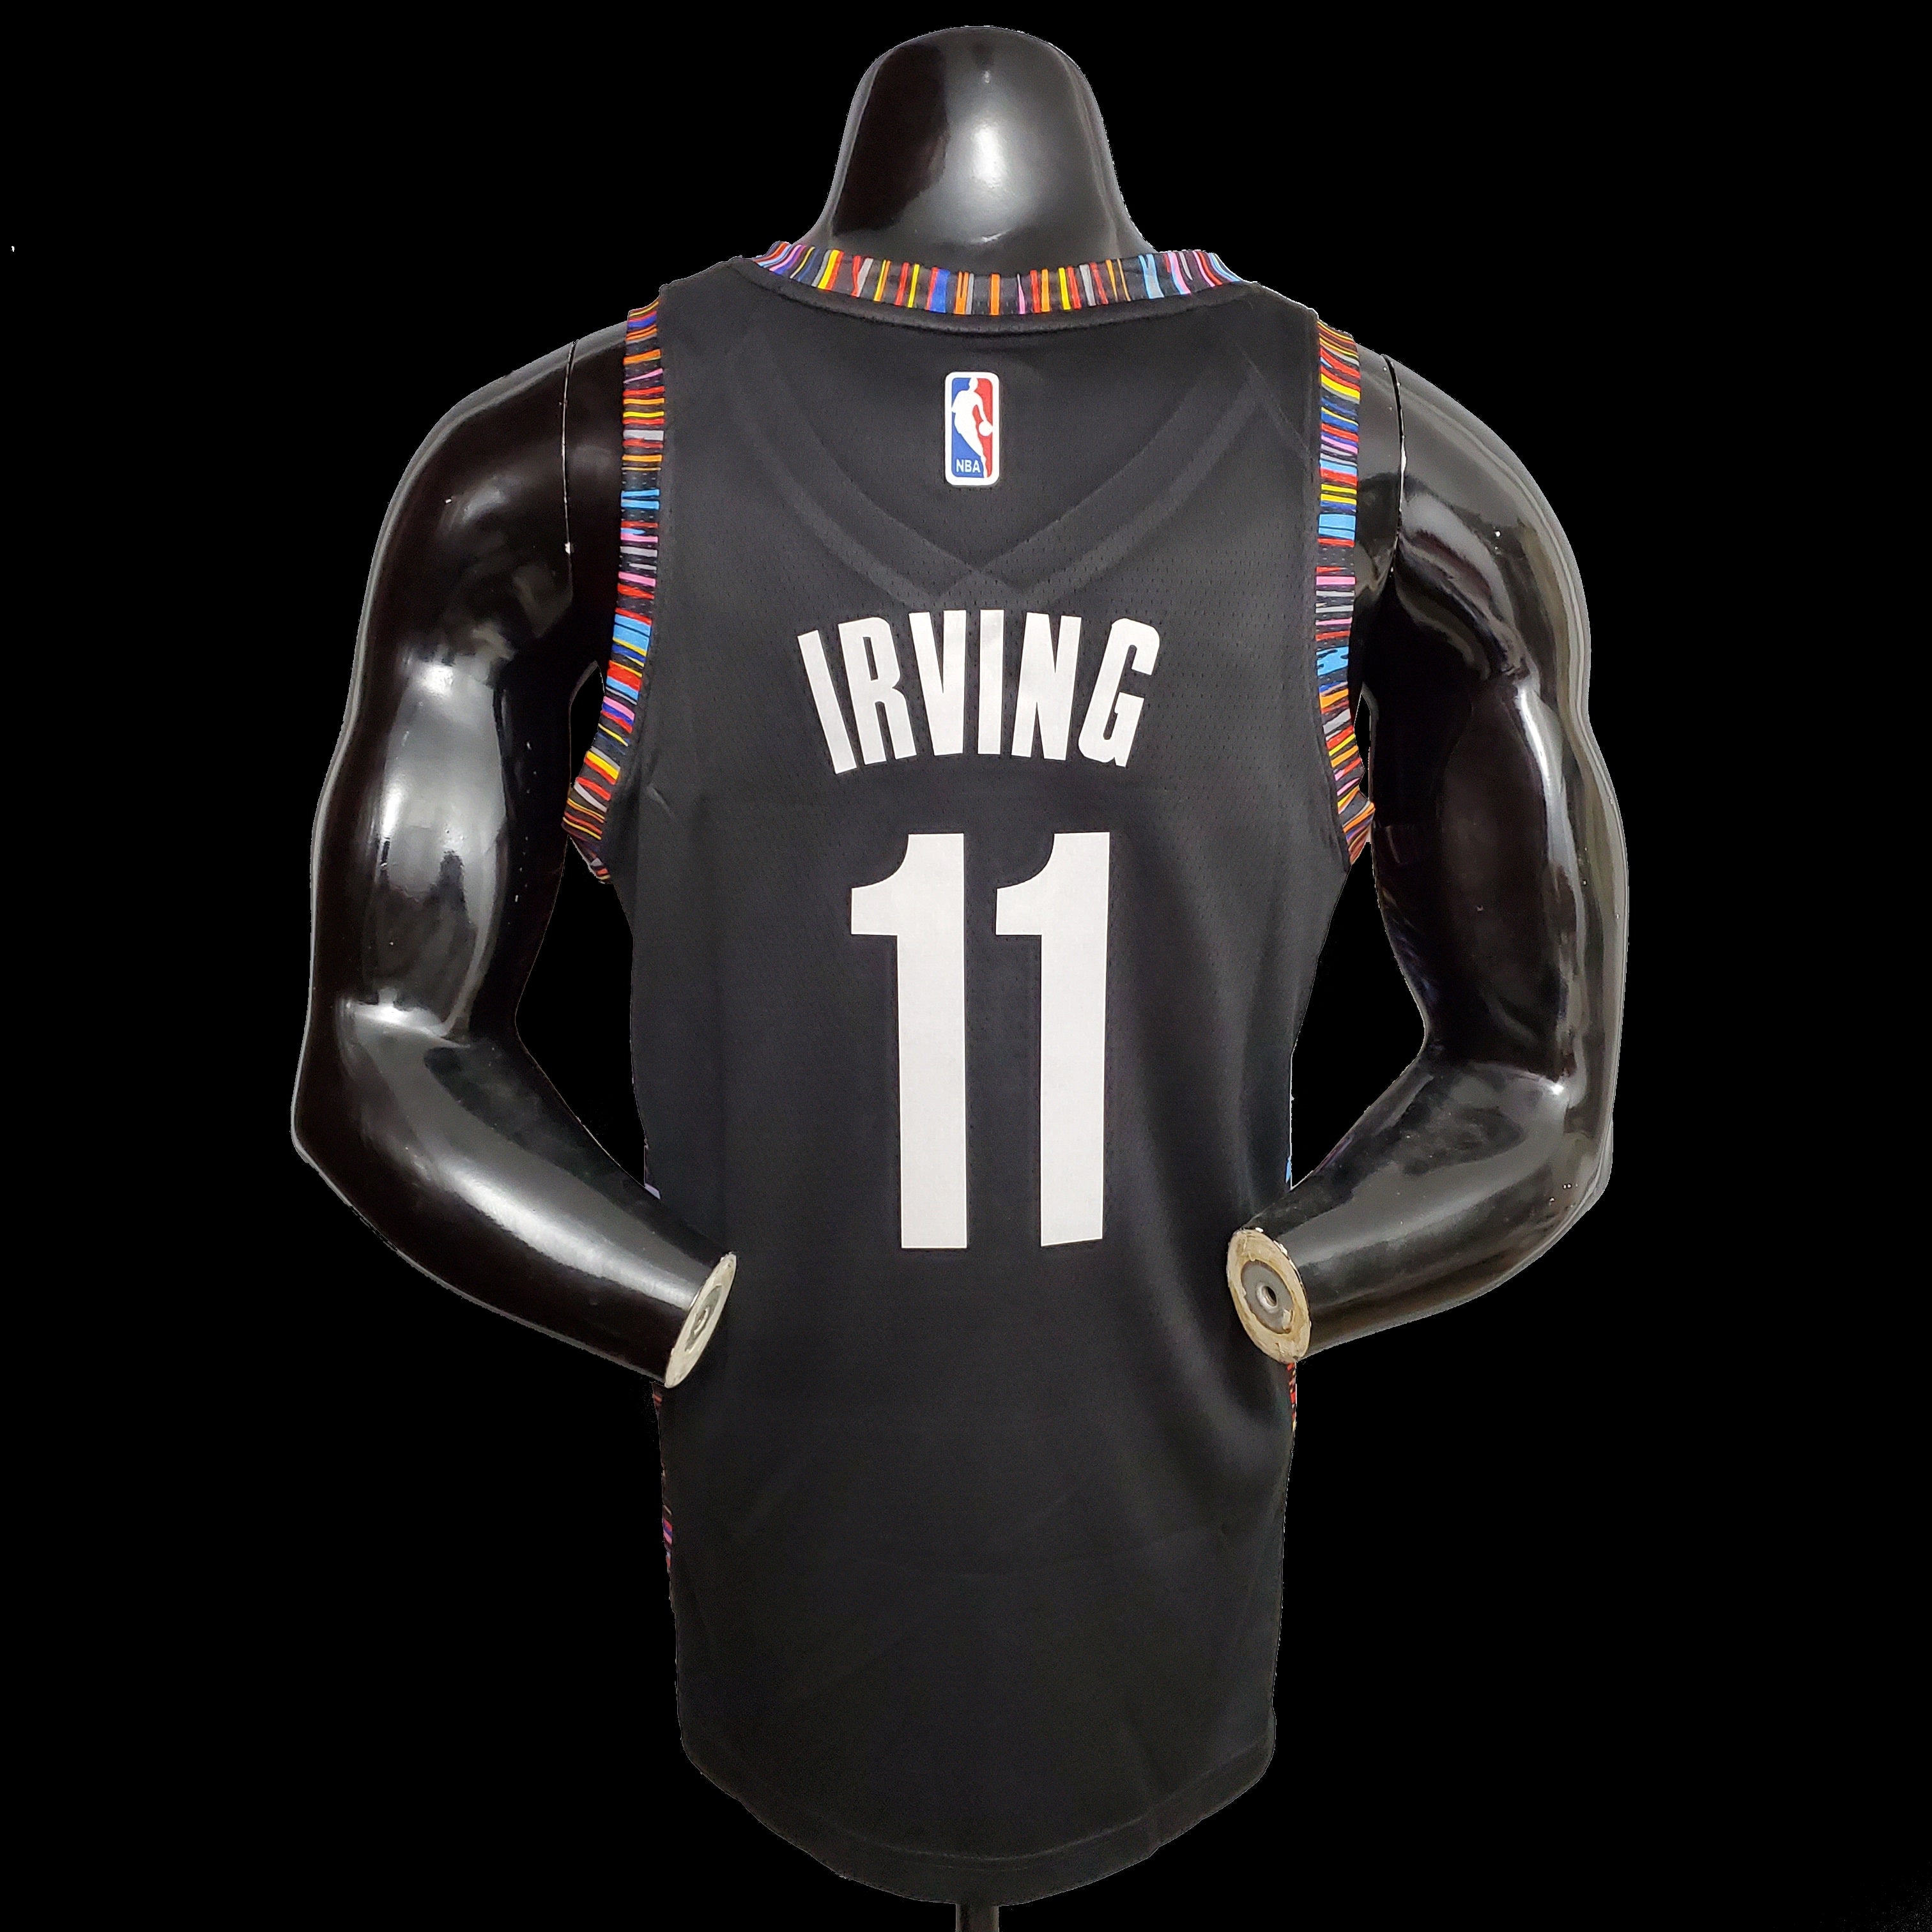 Kyrie Irving 11 Brooklyn Nets 2021 City Edition Black Jersey